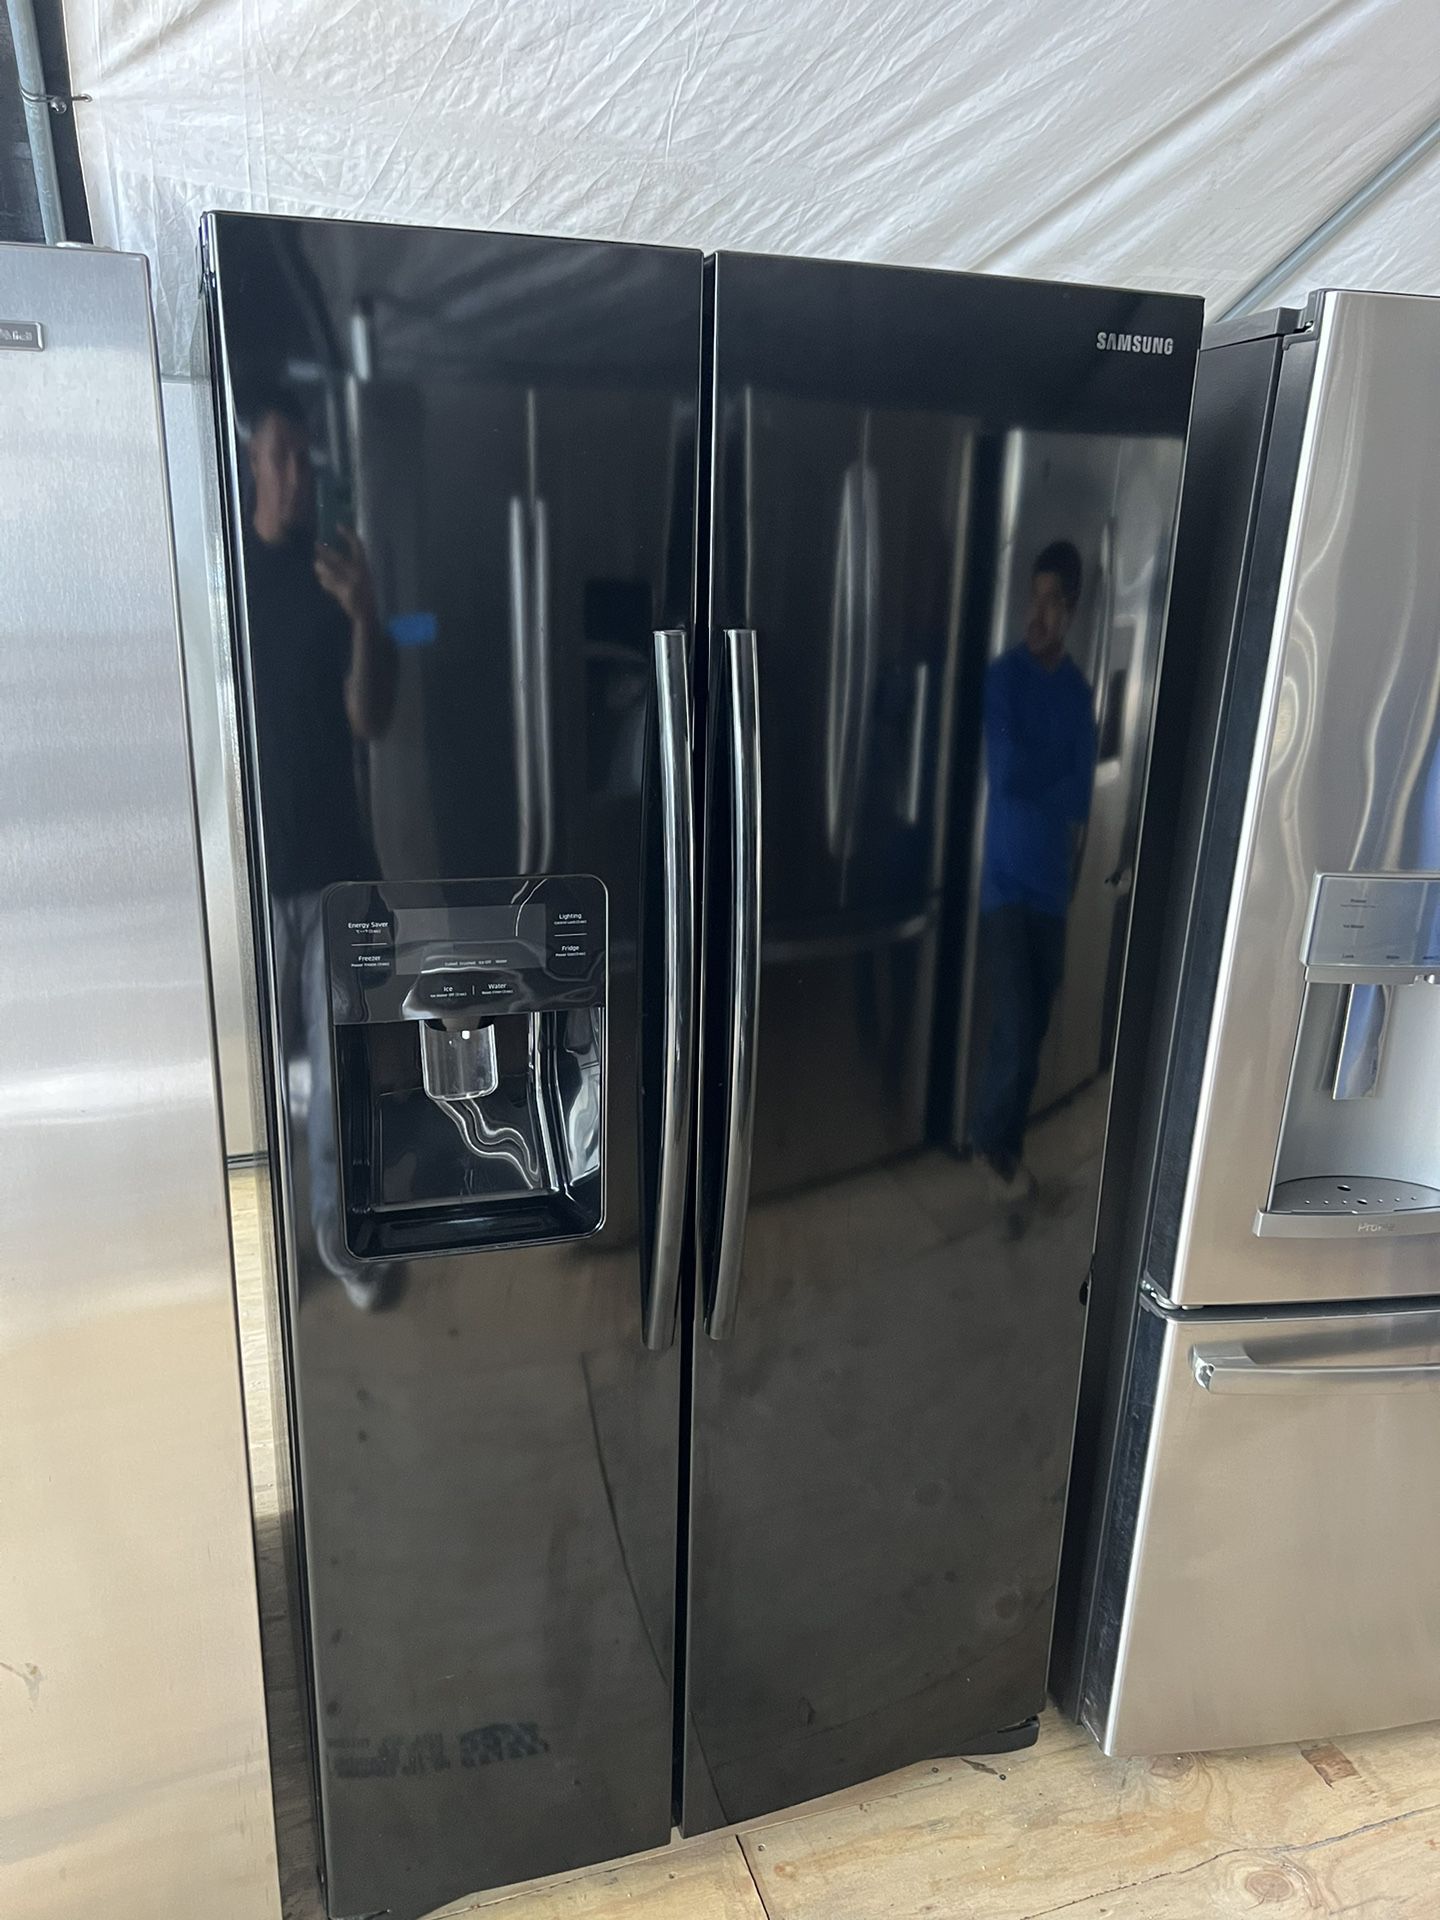 Samsung Side/side Refrigerator   60 day warranty/ Located at:📍5415 Carmack Rd Tampa Fl 33610📍